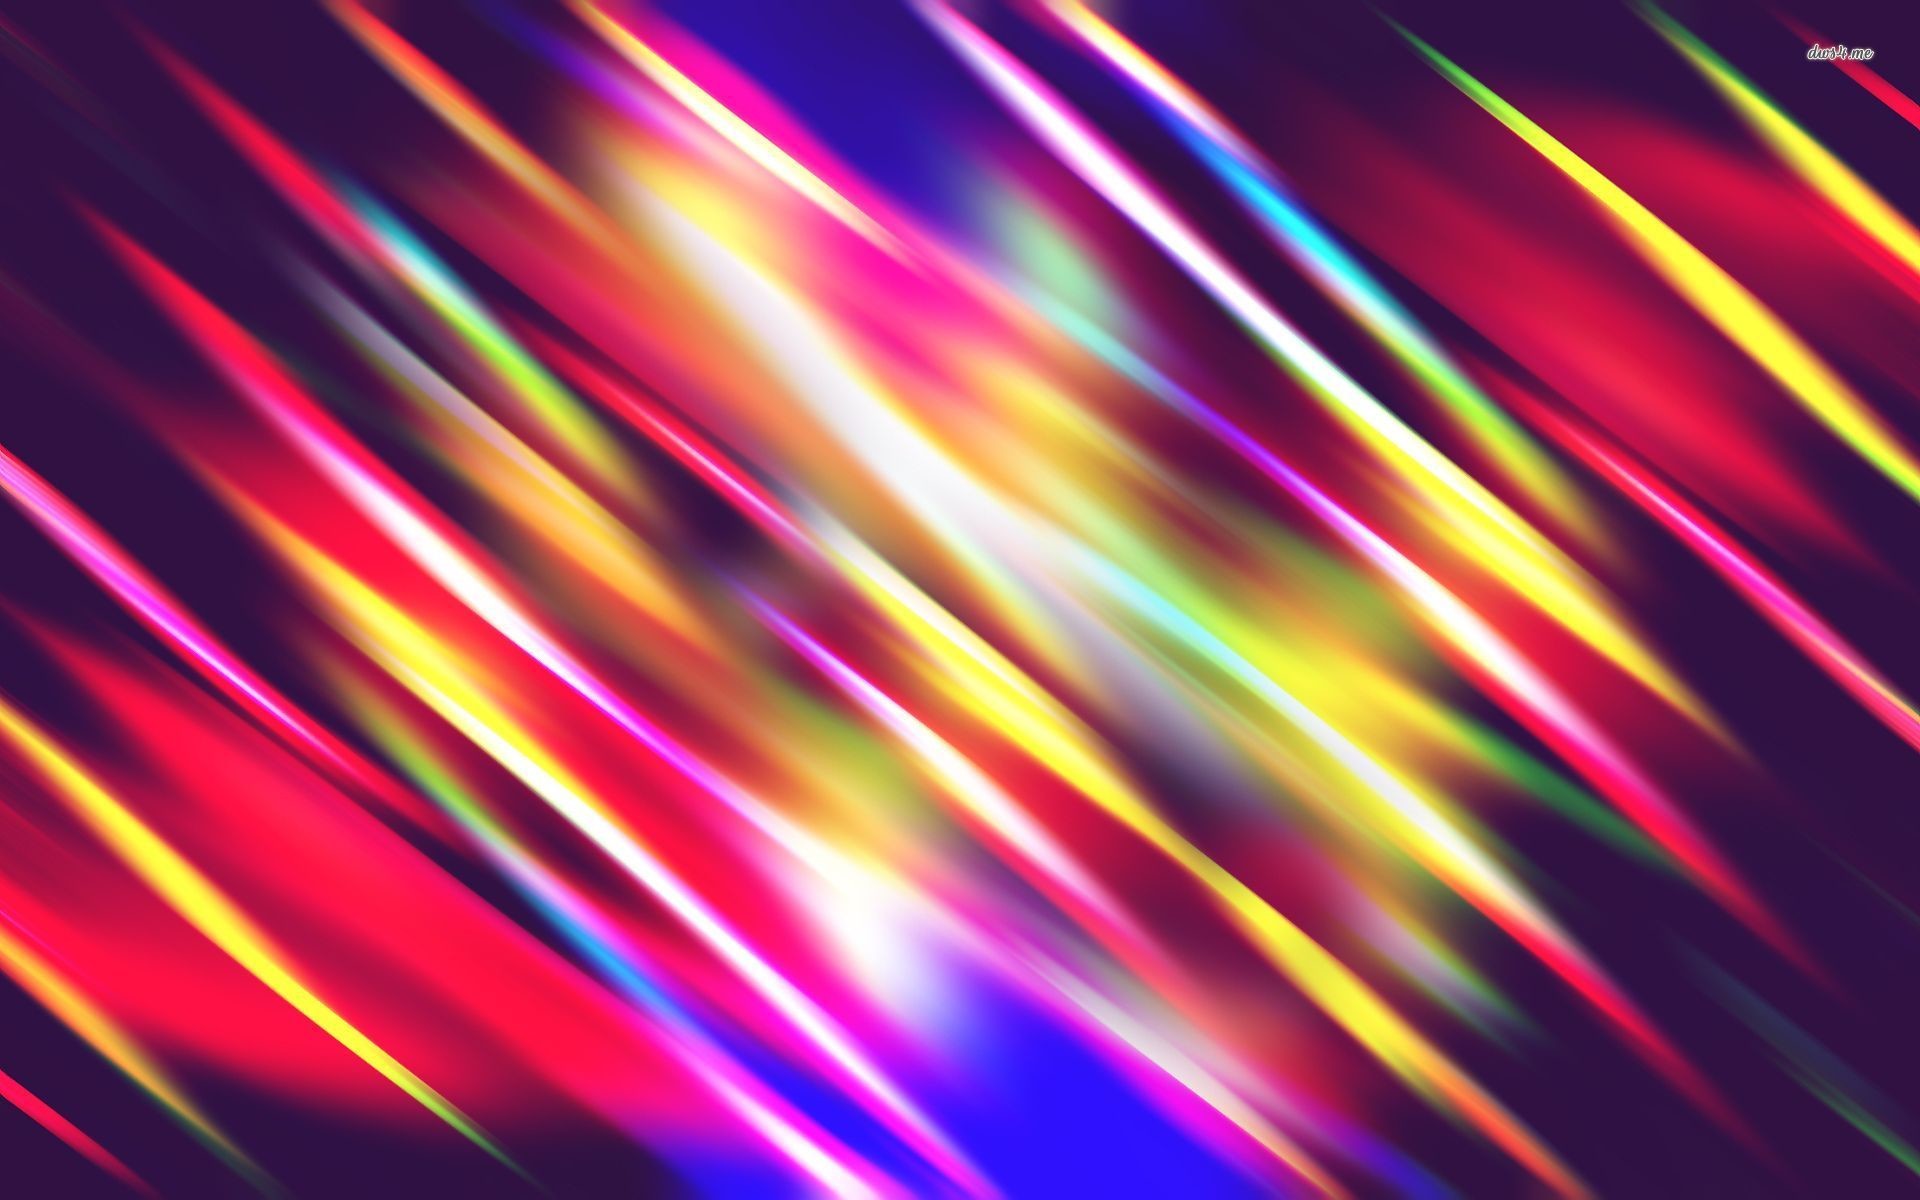 1920x1200 Recommended: Neon Backgrounds March 14, 2016, Lucy Prasad